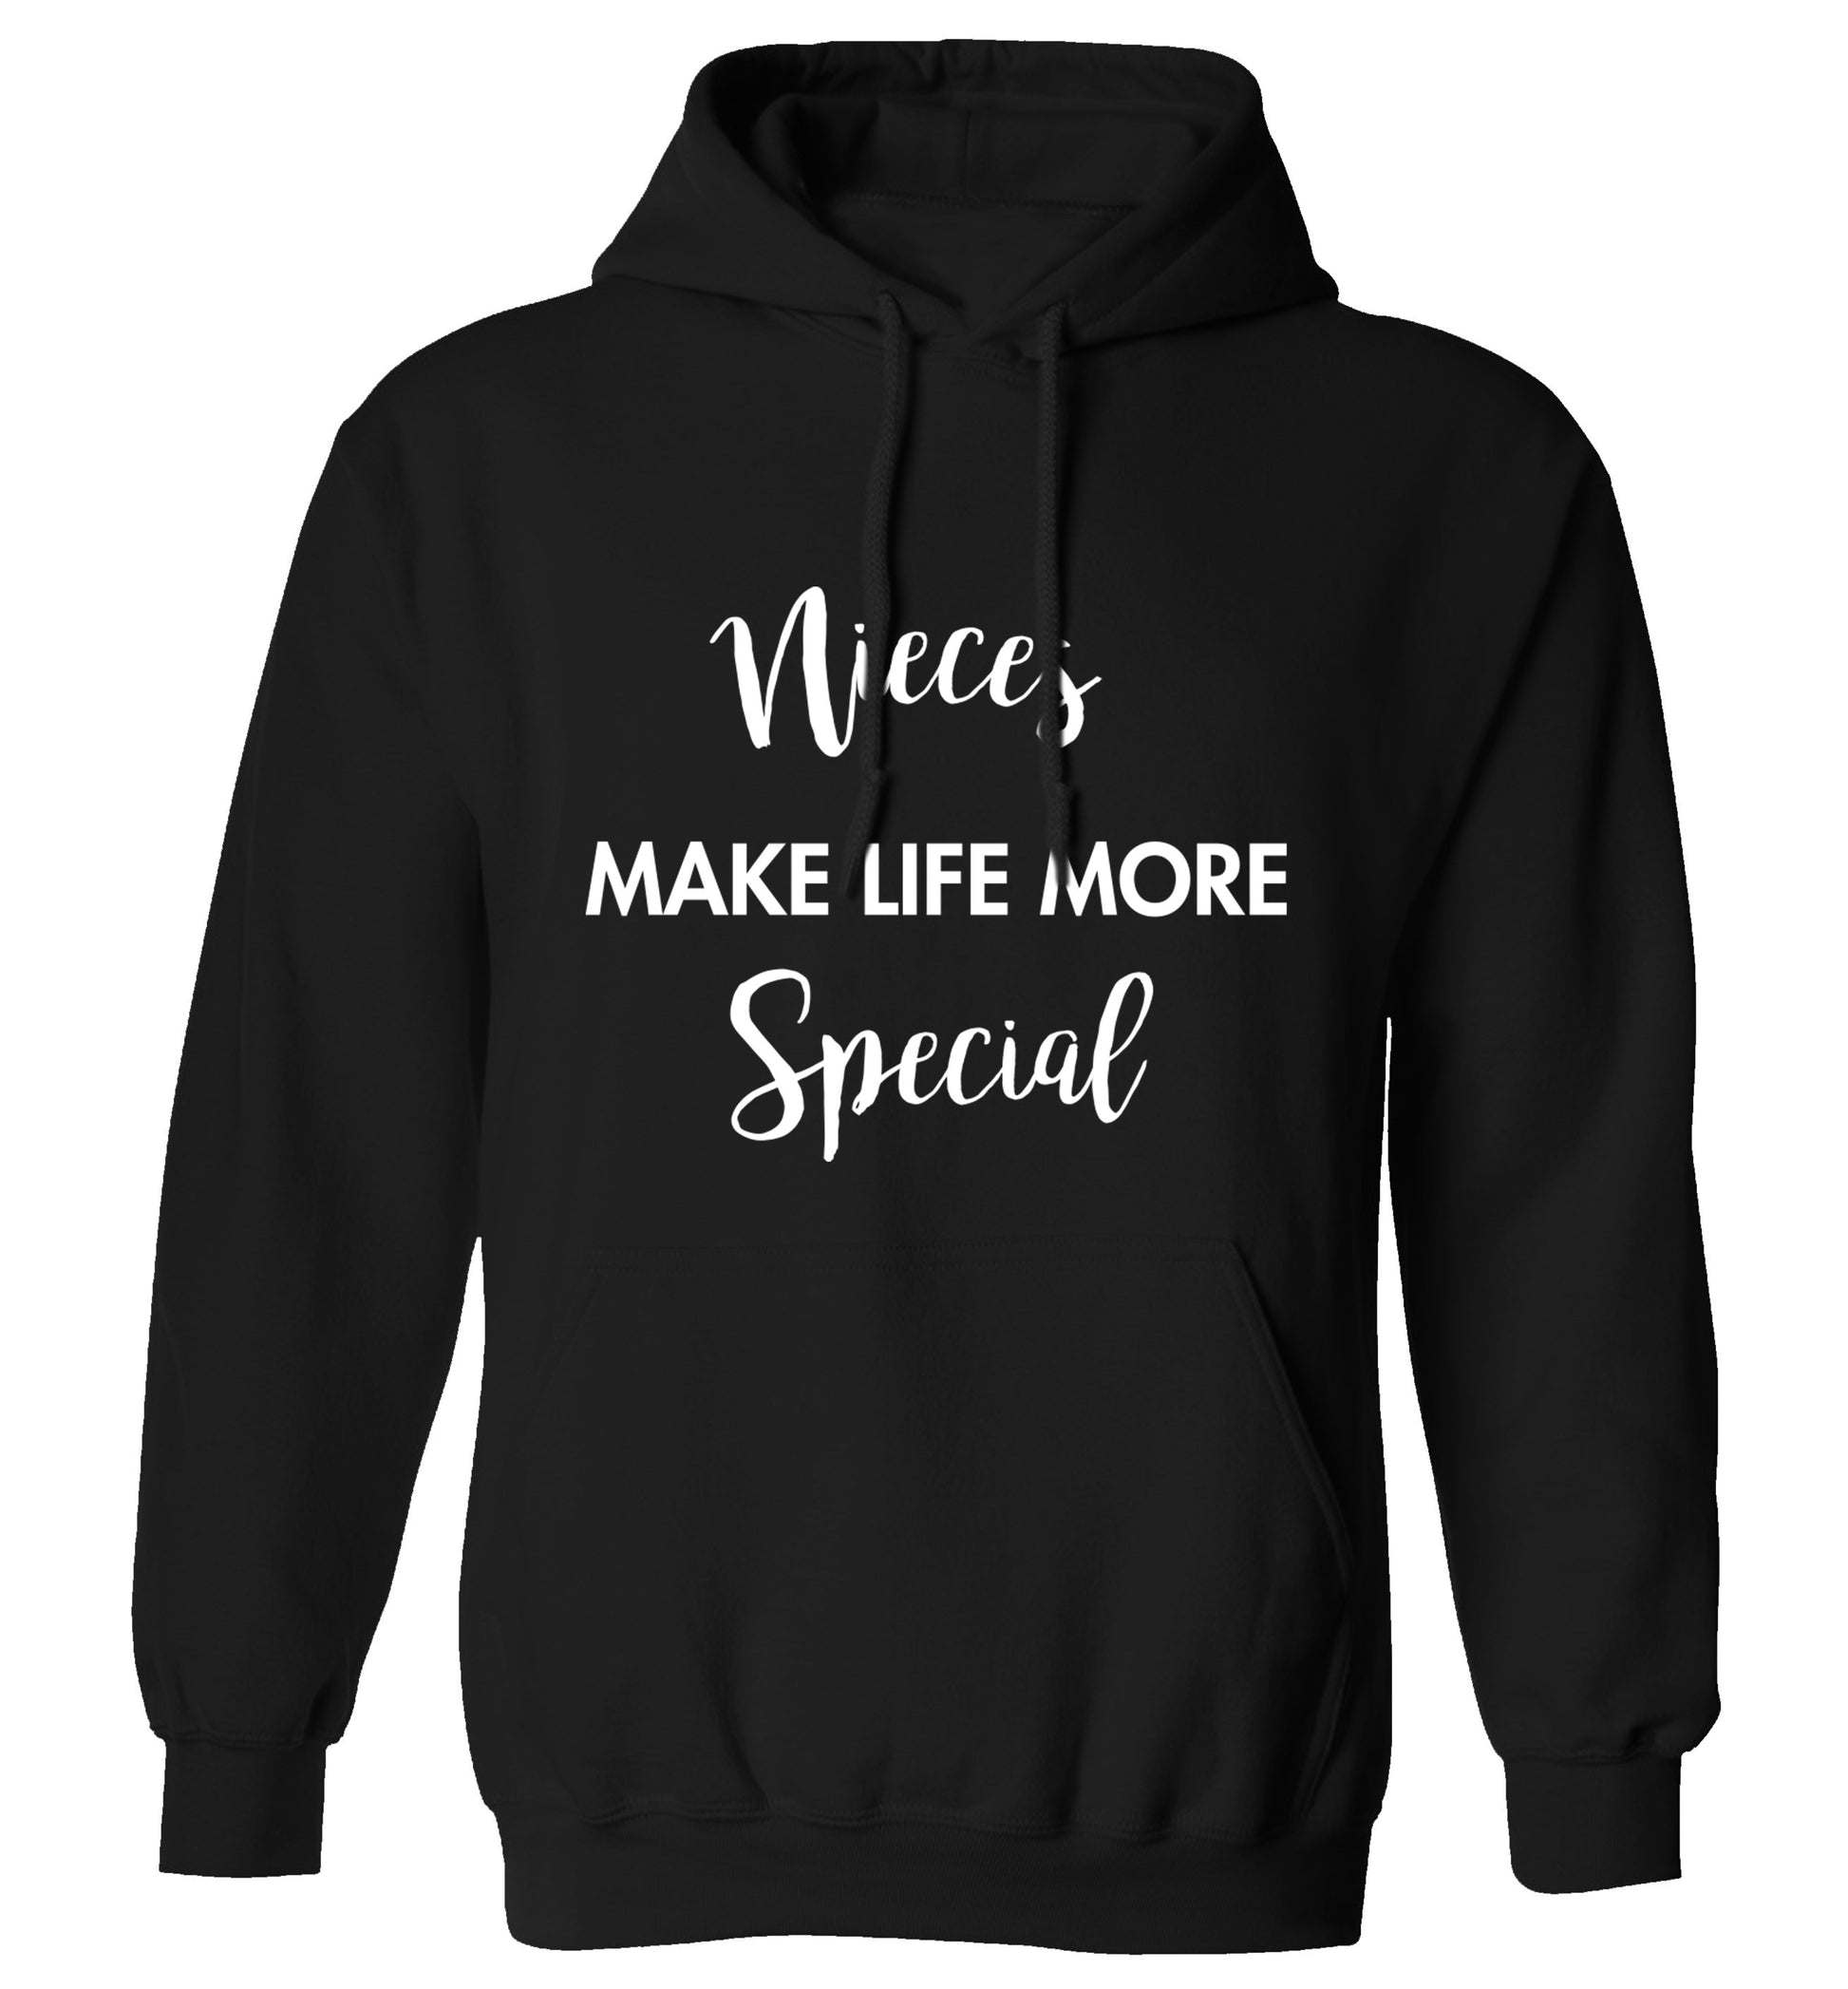 Nieces make life more special adults unisex black hoodie 2XL